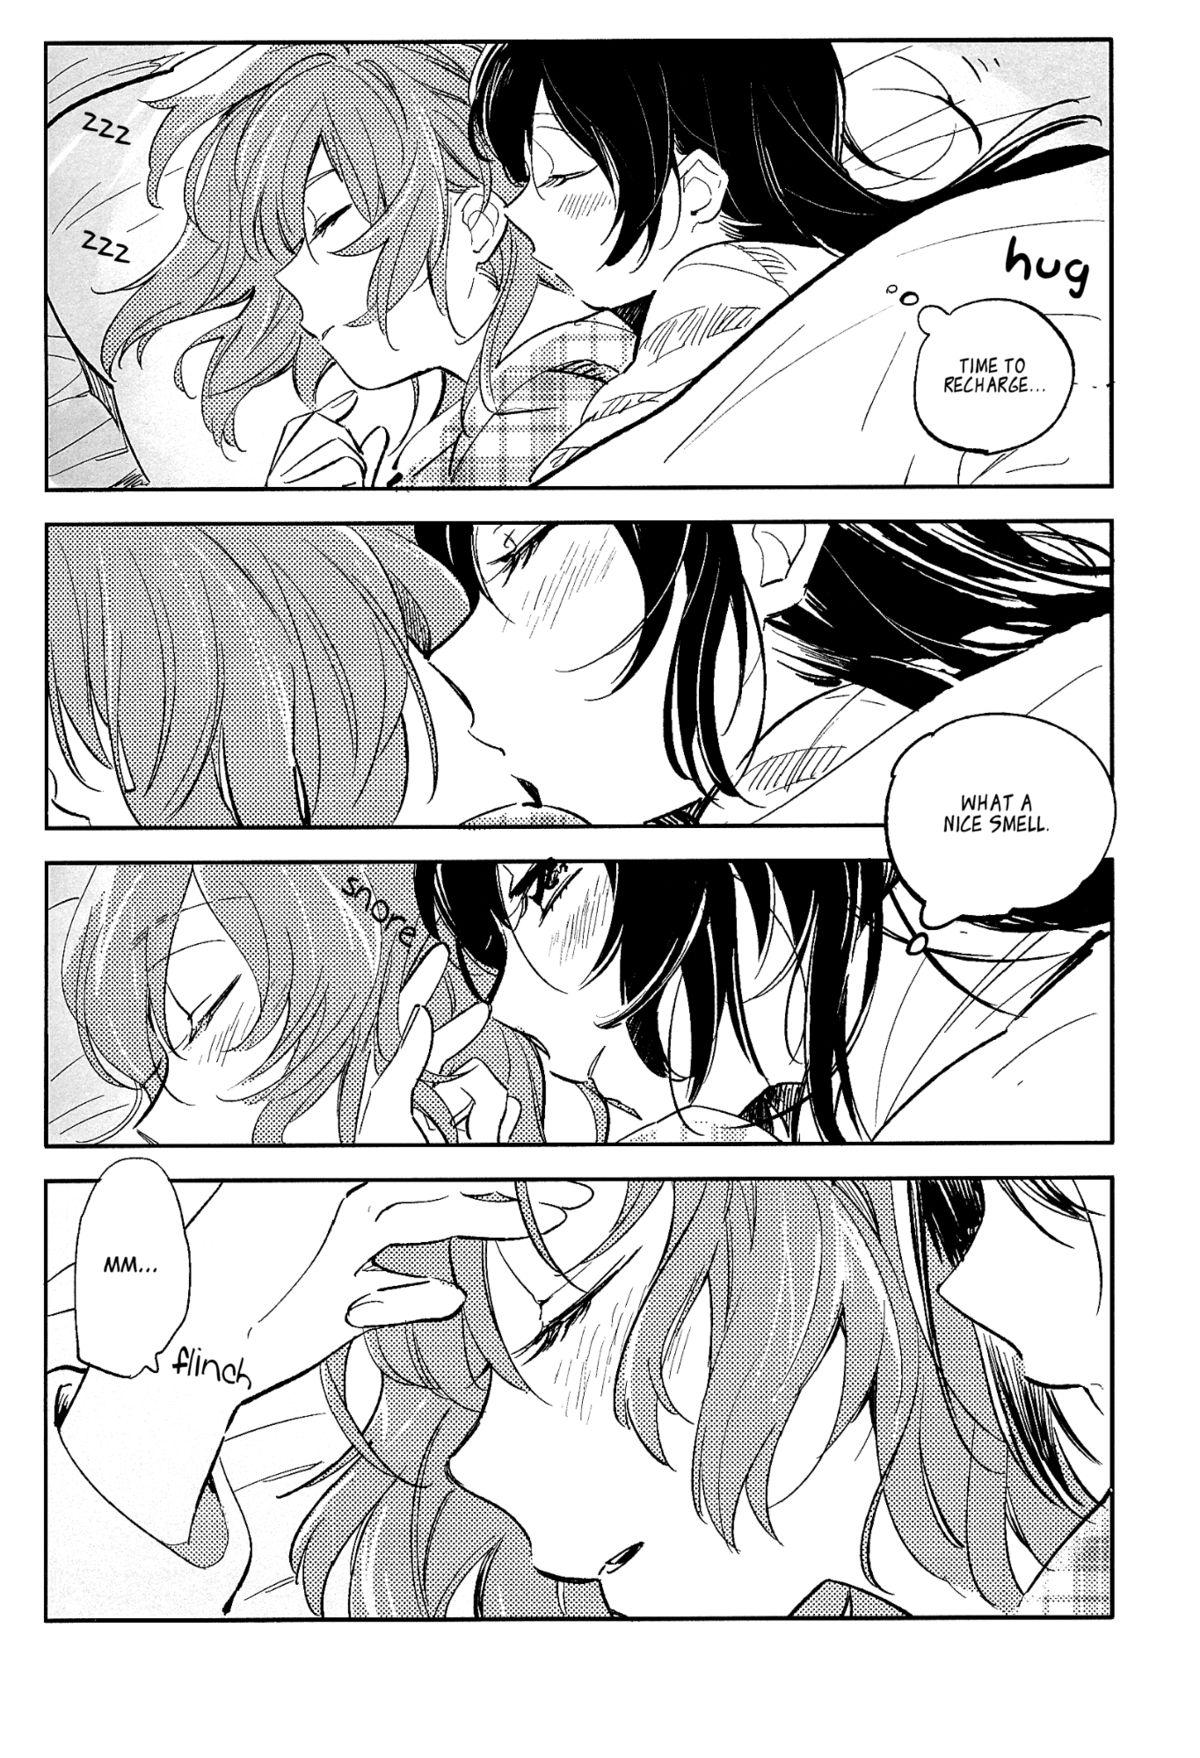 Brazilian Koibito no Jikan | Time for Lovers - Love live Pussysex - Page 6